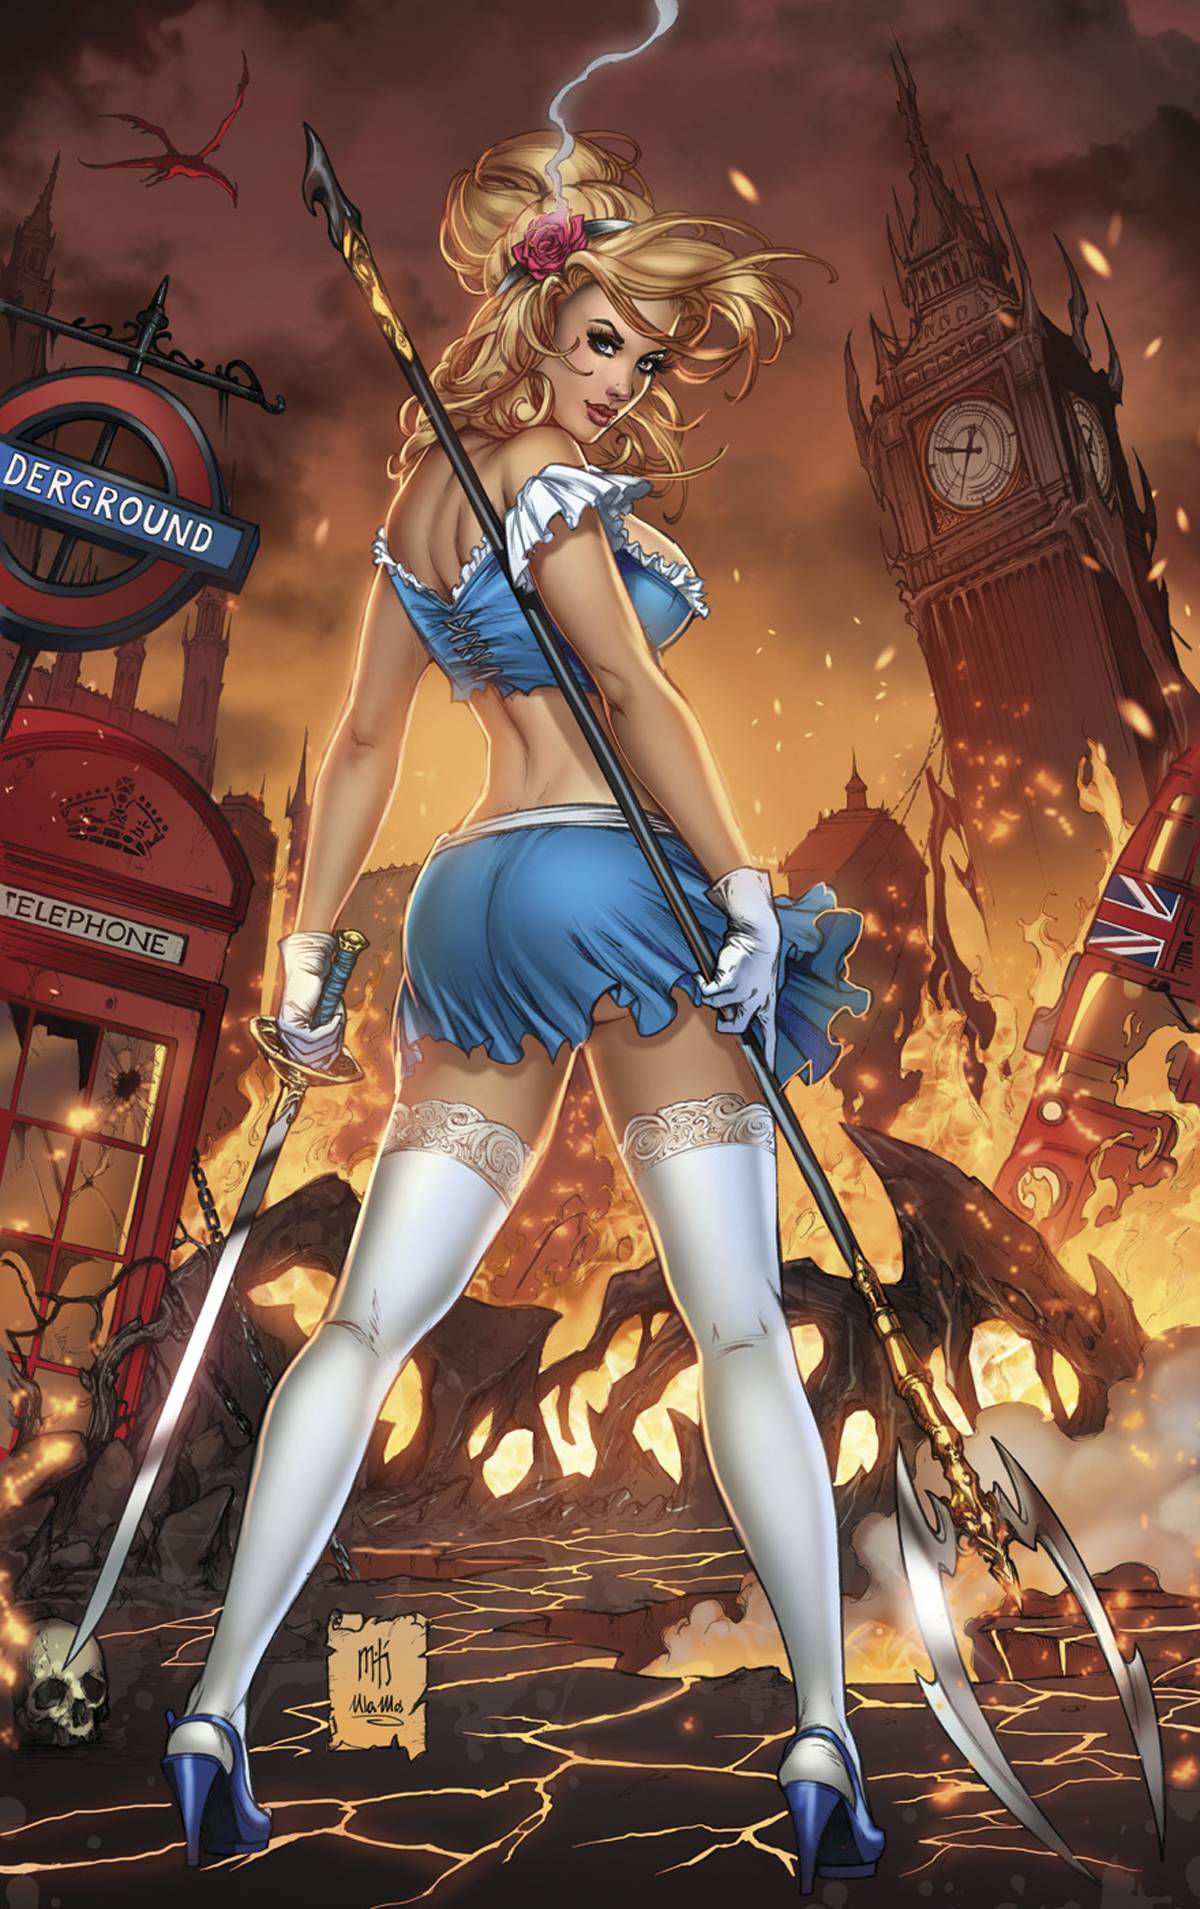 Grimm Fairy Tales: Bad Grils Backgrounds on Wallpapers Vista